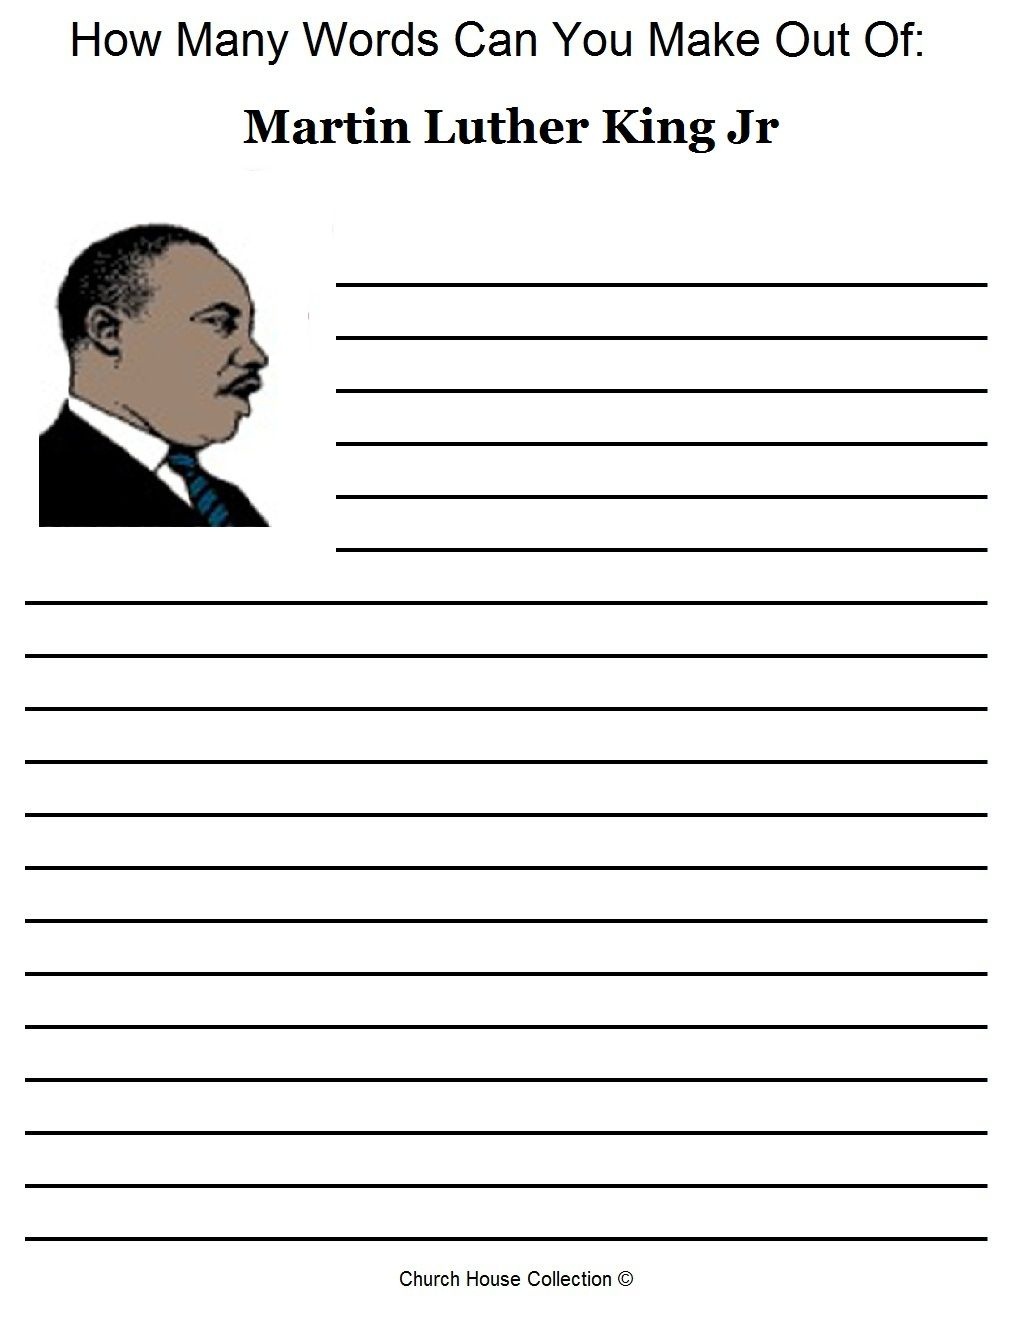 Free Martin Luther King Jr Worksheets- How Many Words Can You Make - Free Printable Martin Luther King Jr Worksheets